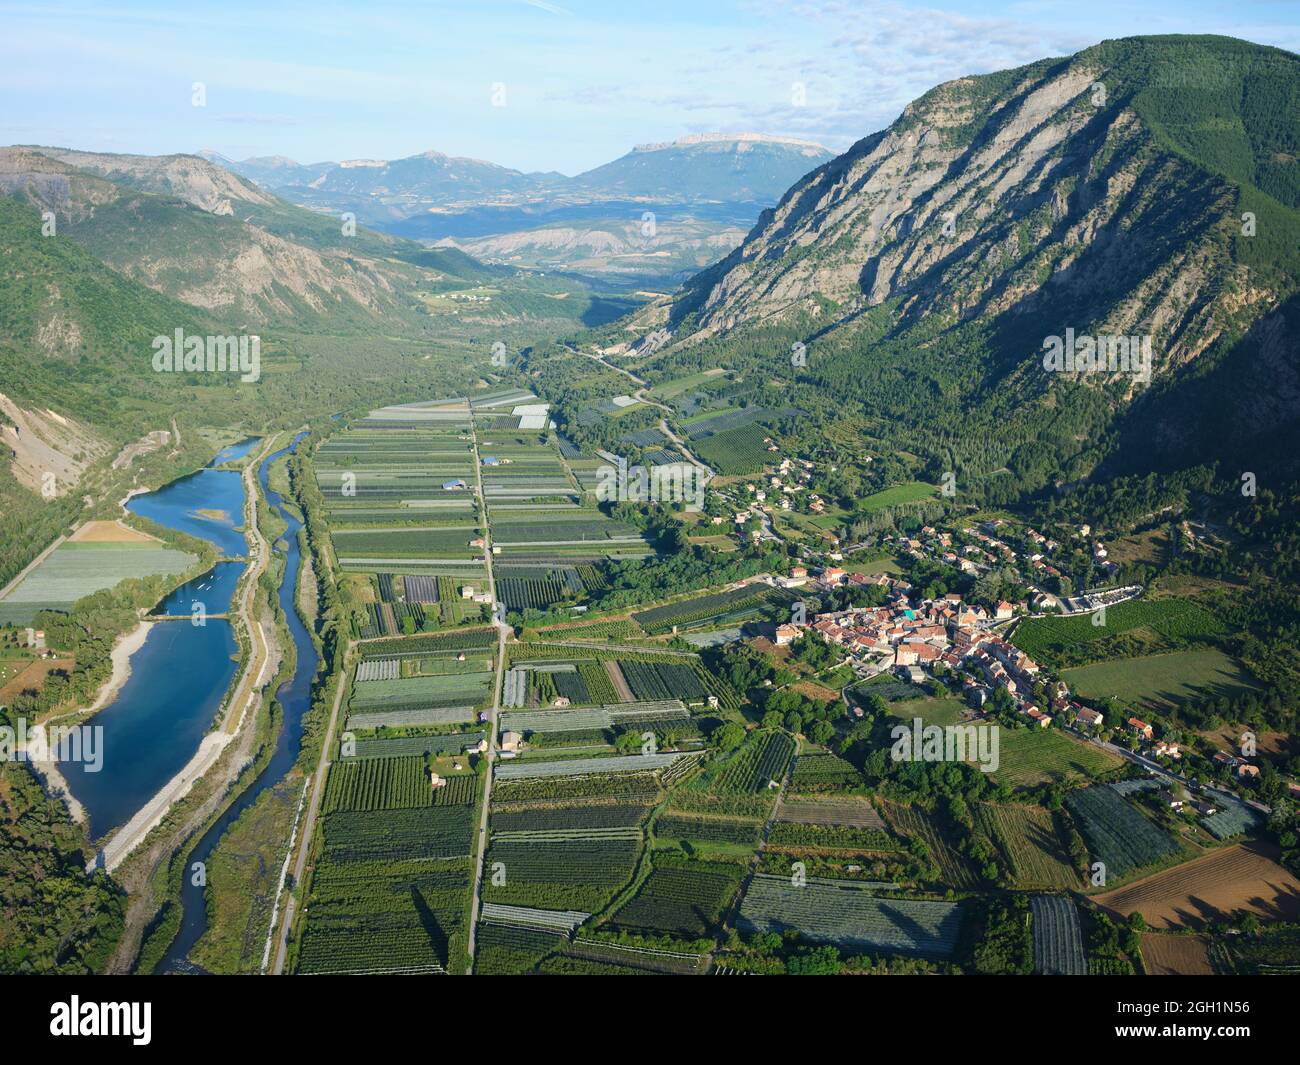 AERIAL VIEW. Village of Remollon on the right bank of the Durance River with its apple orchards. Hautes-Alpes, France. Stock Photo